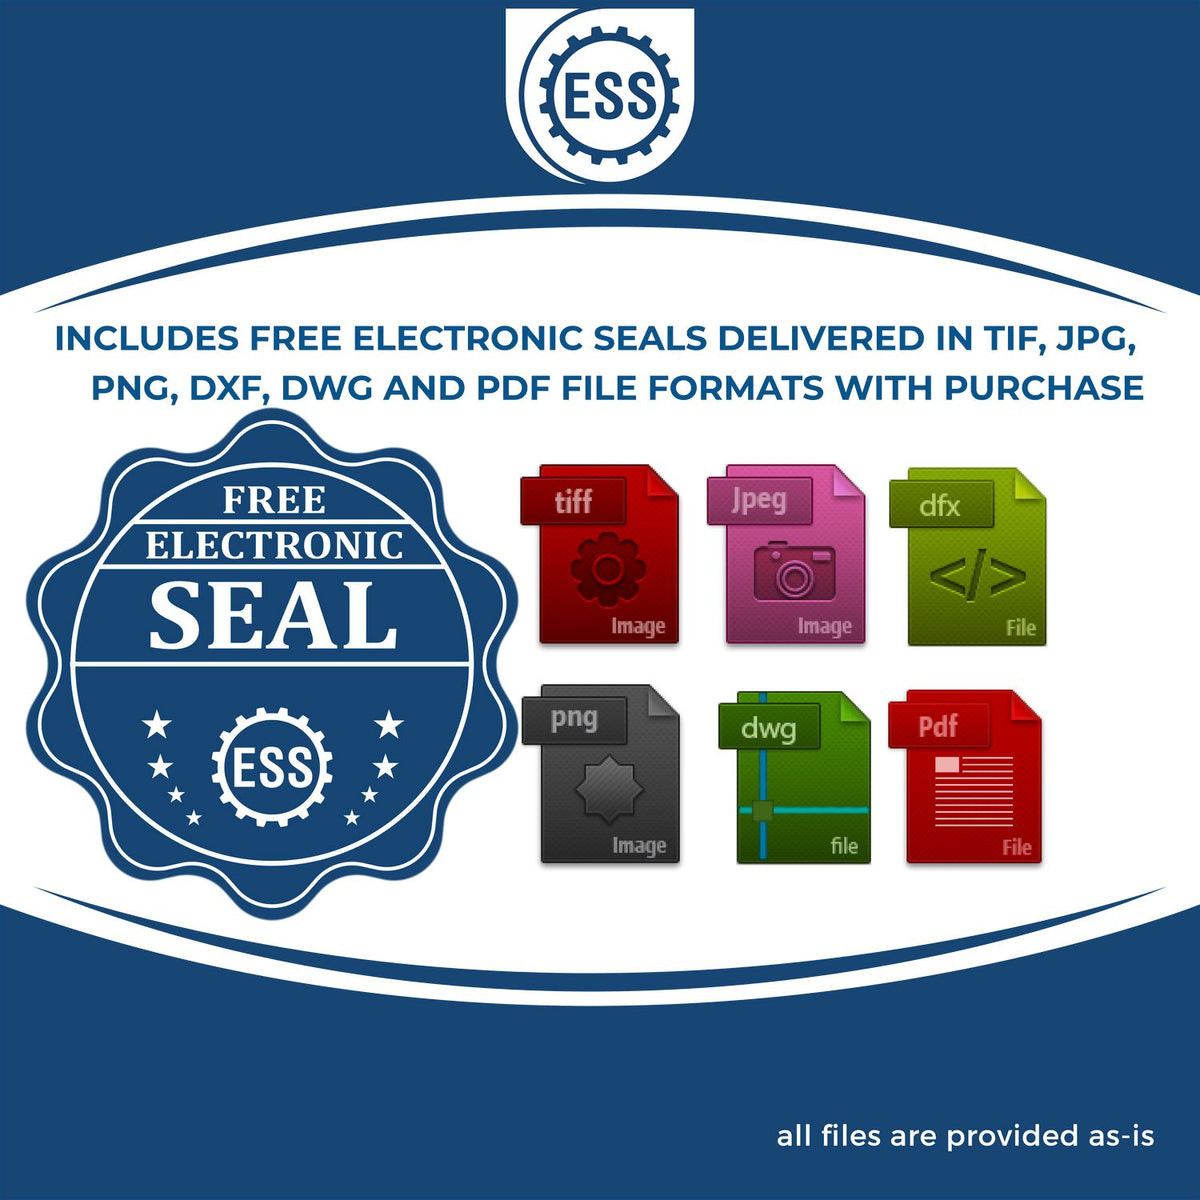 An infographic for the free electronic seal for the Self-Inking Nebraska Geologist Stamp illustrating the different file type icons such as DXF, DWG, TIF, JPG and PNG.